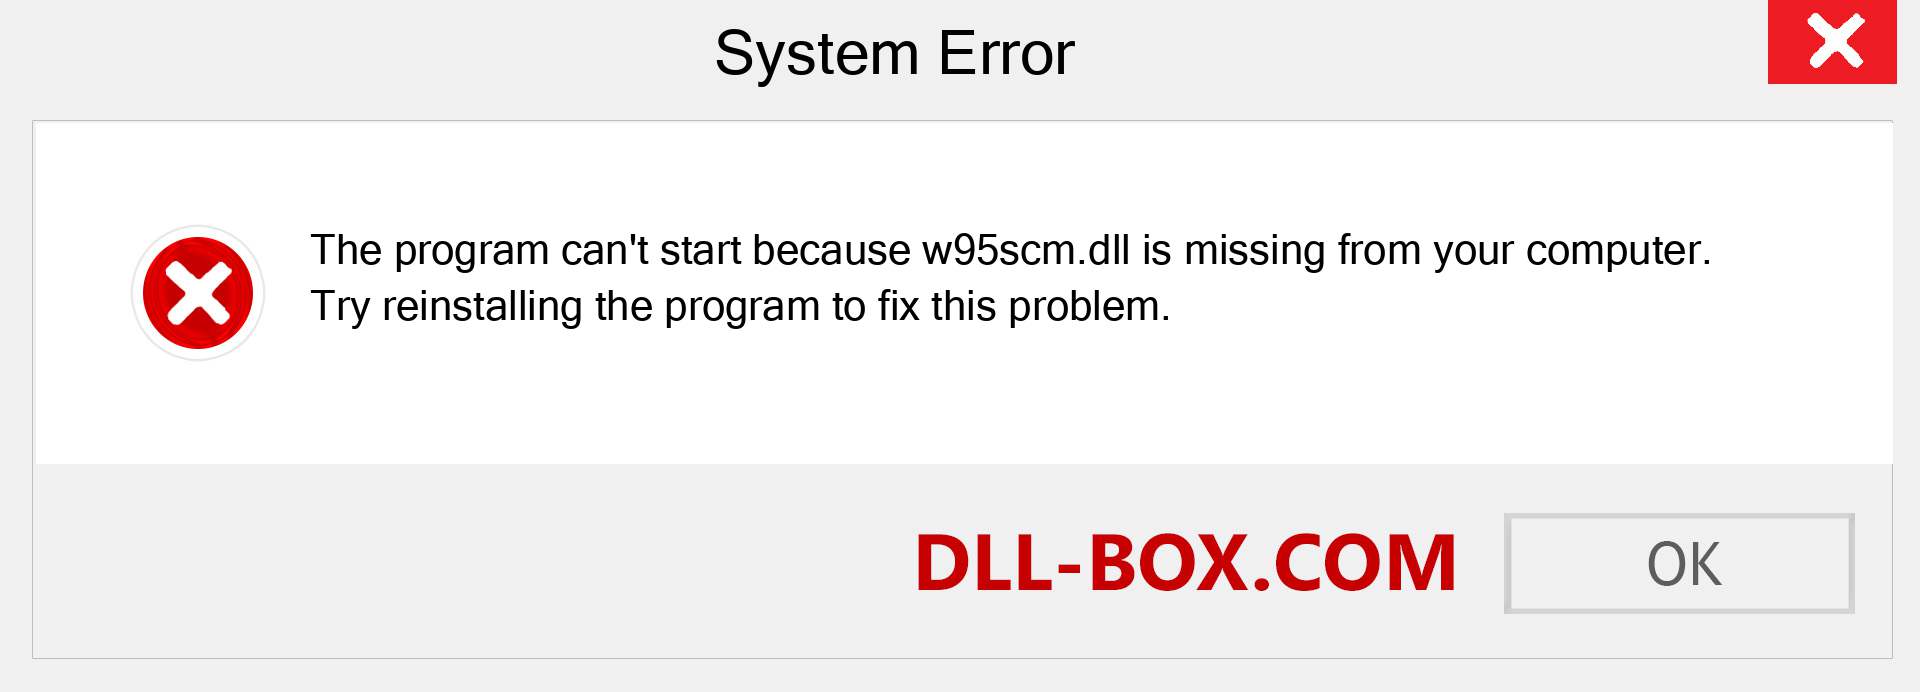  w95scm.dll file is missing?. Download for Windows 7, 8, 10 - Fix  w95scm dll Missing Error on Windows, photos, images